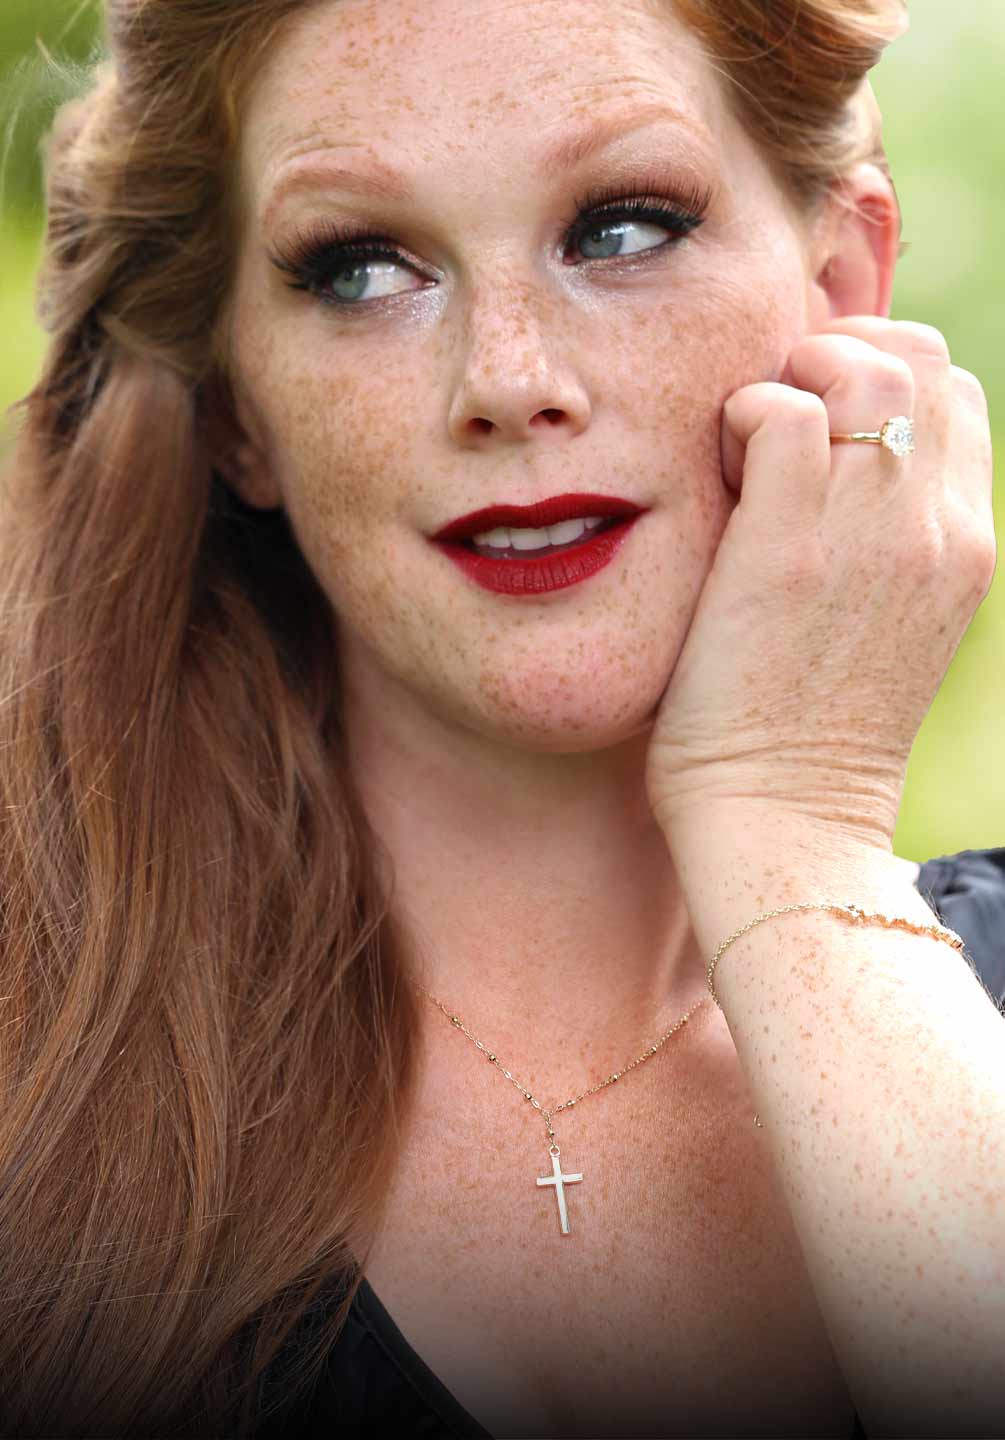 A women modeling a cross necklace and oval engagement ring.